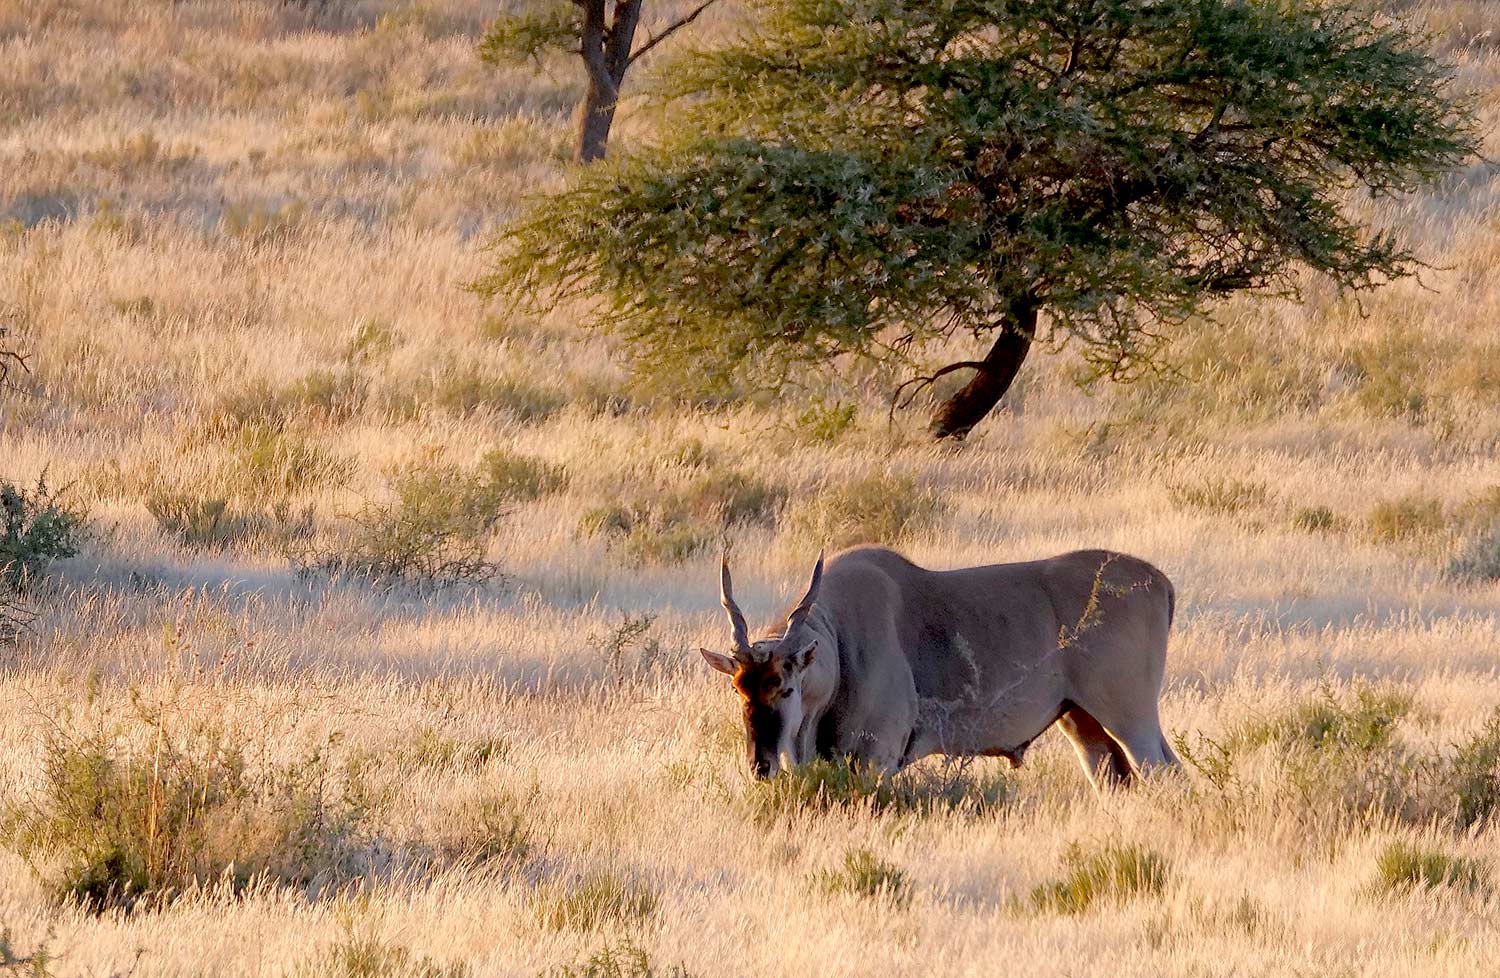 An old eland bull in Africa.